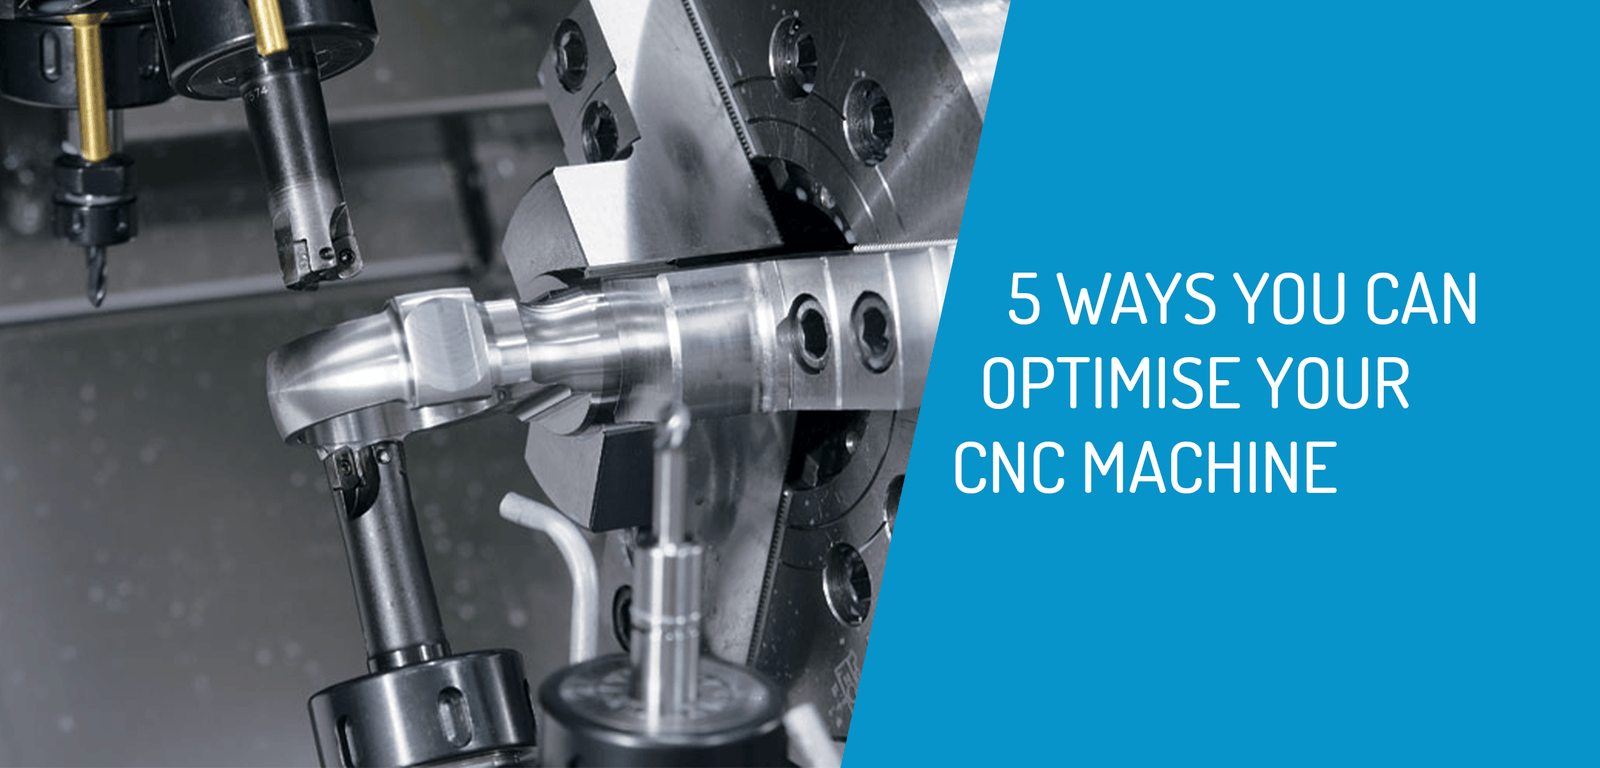 5 Ways You Can Optimise your CNC Machine